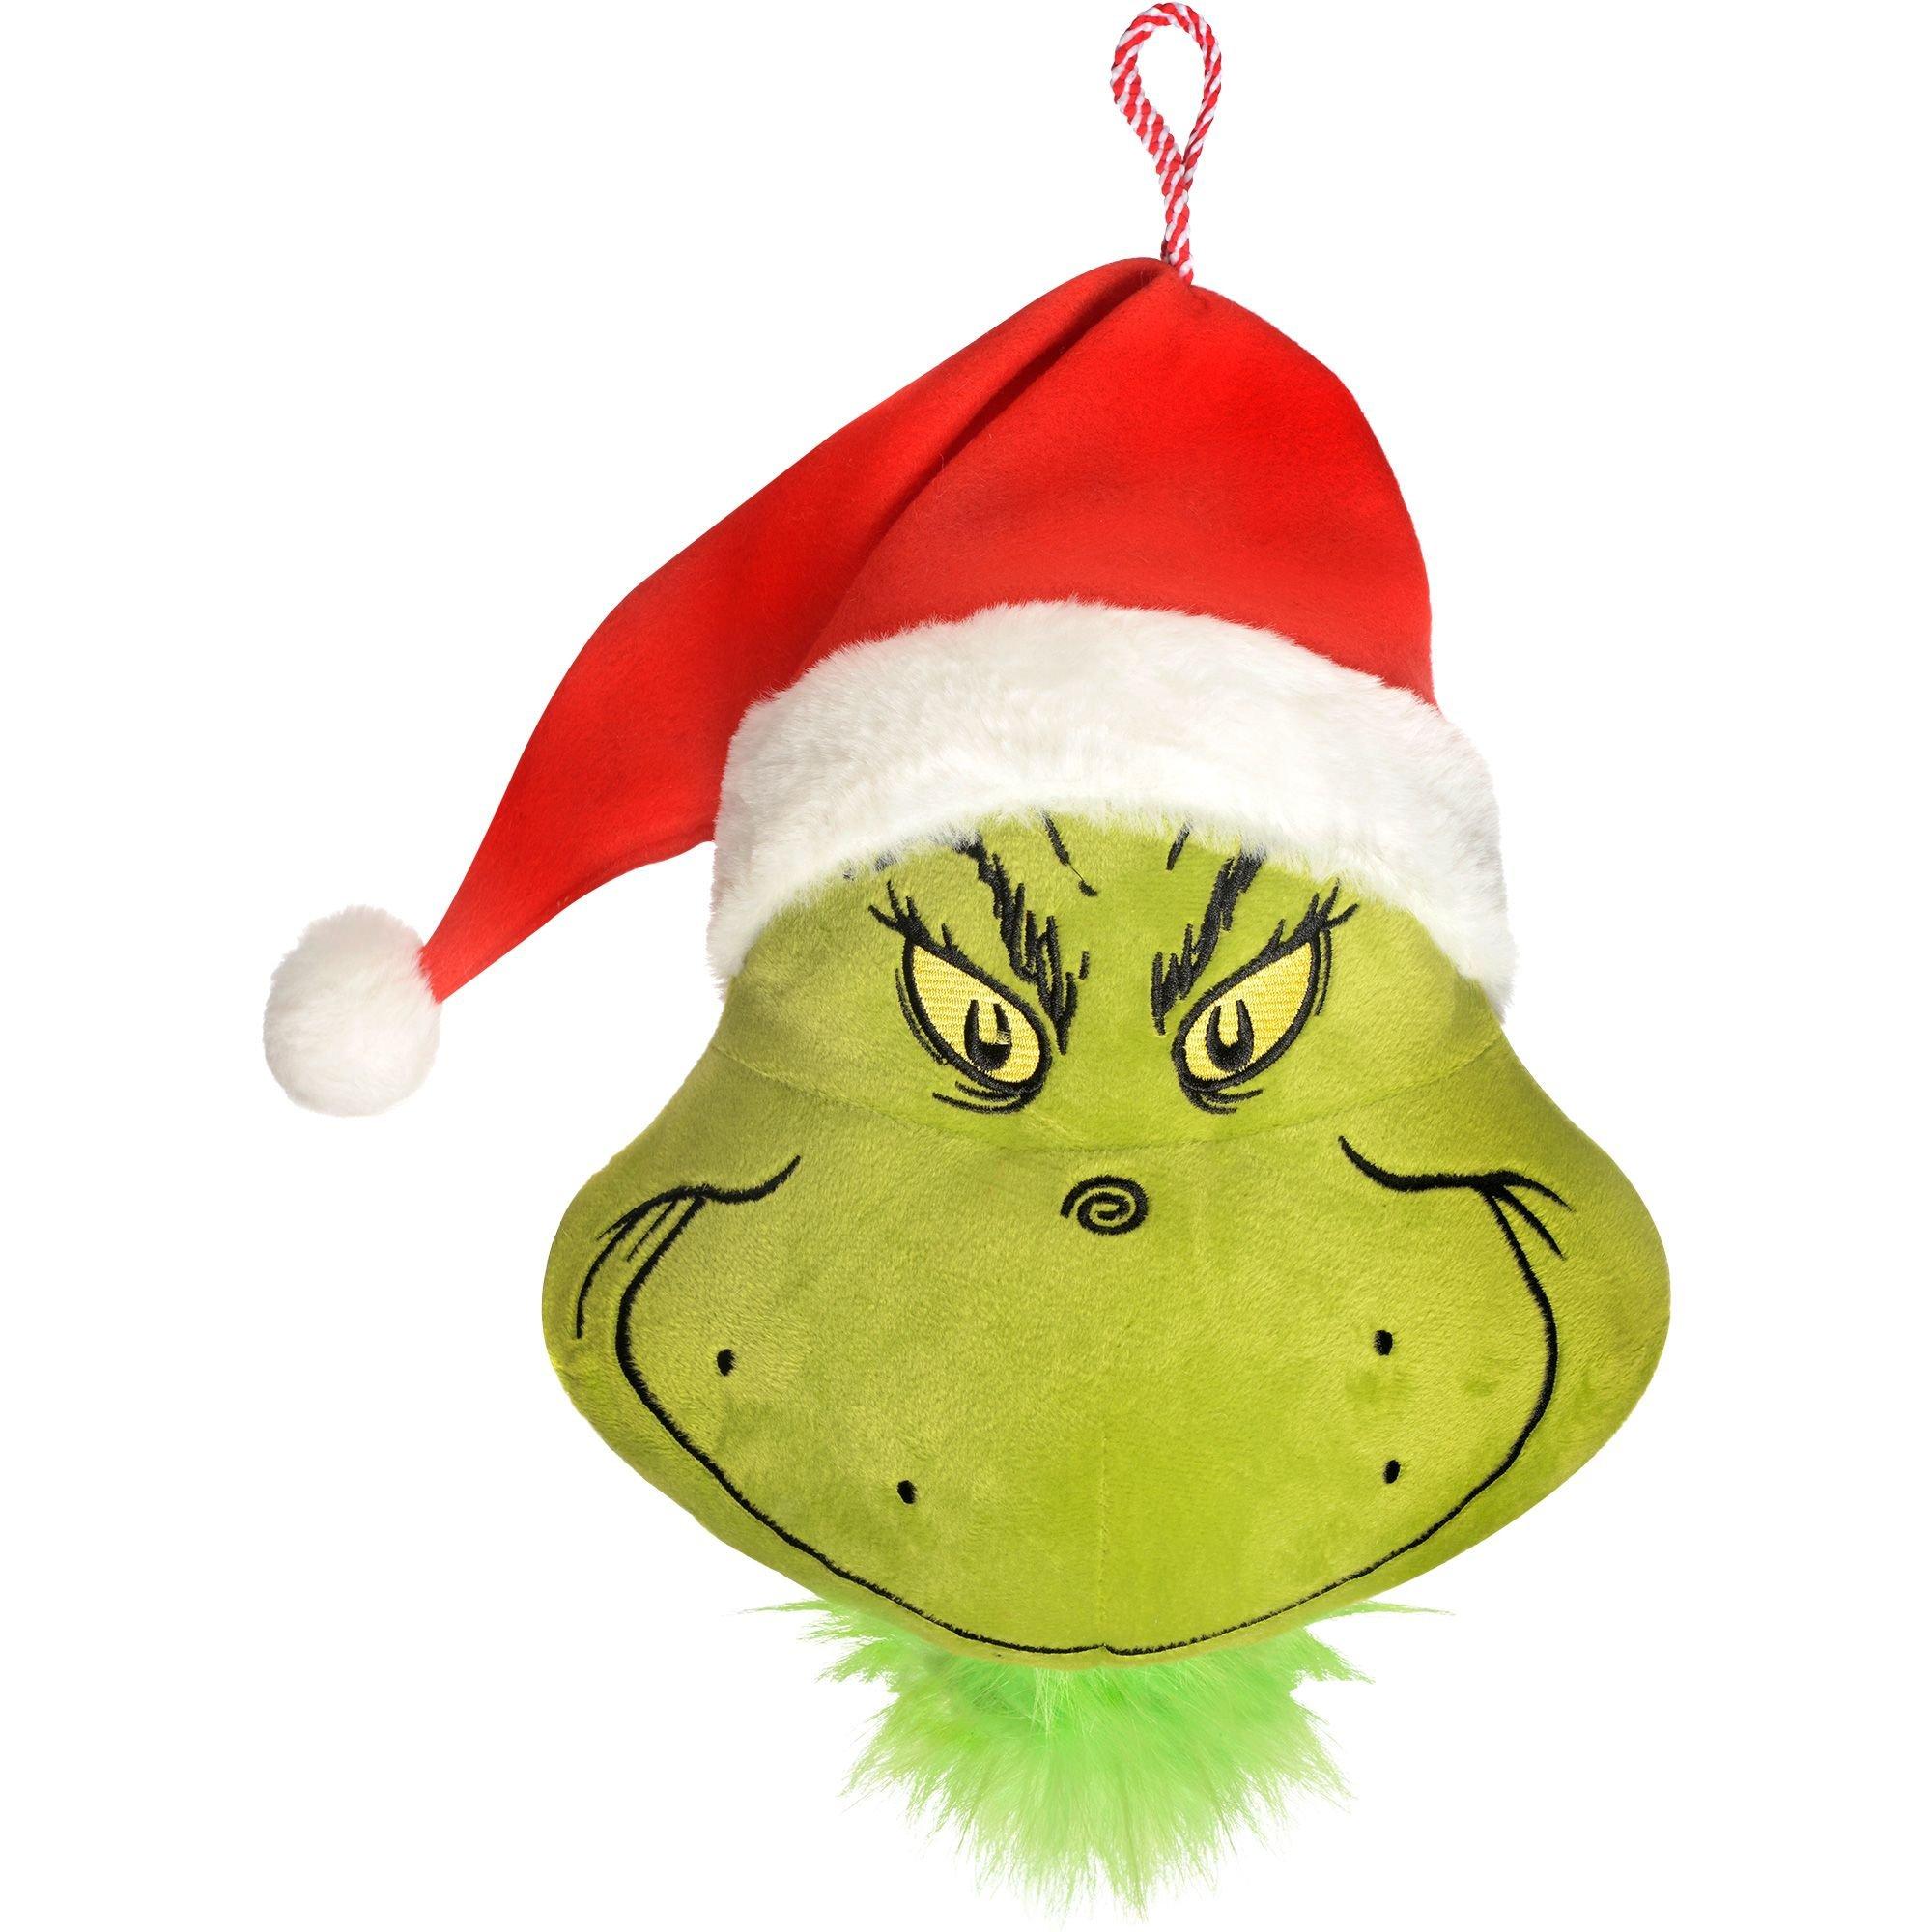 Christmas Grinch Plush Doll Soft Toy Stuffed Teddy Dog Plush Toys Home  Decoration Xmas Gifts for Kids 